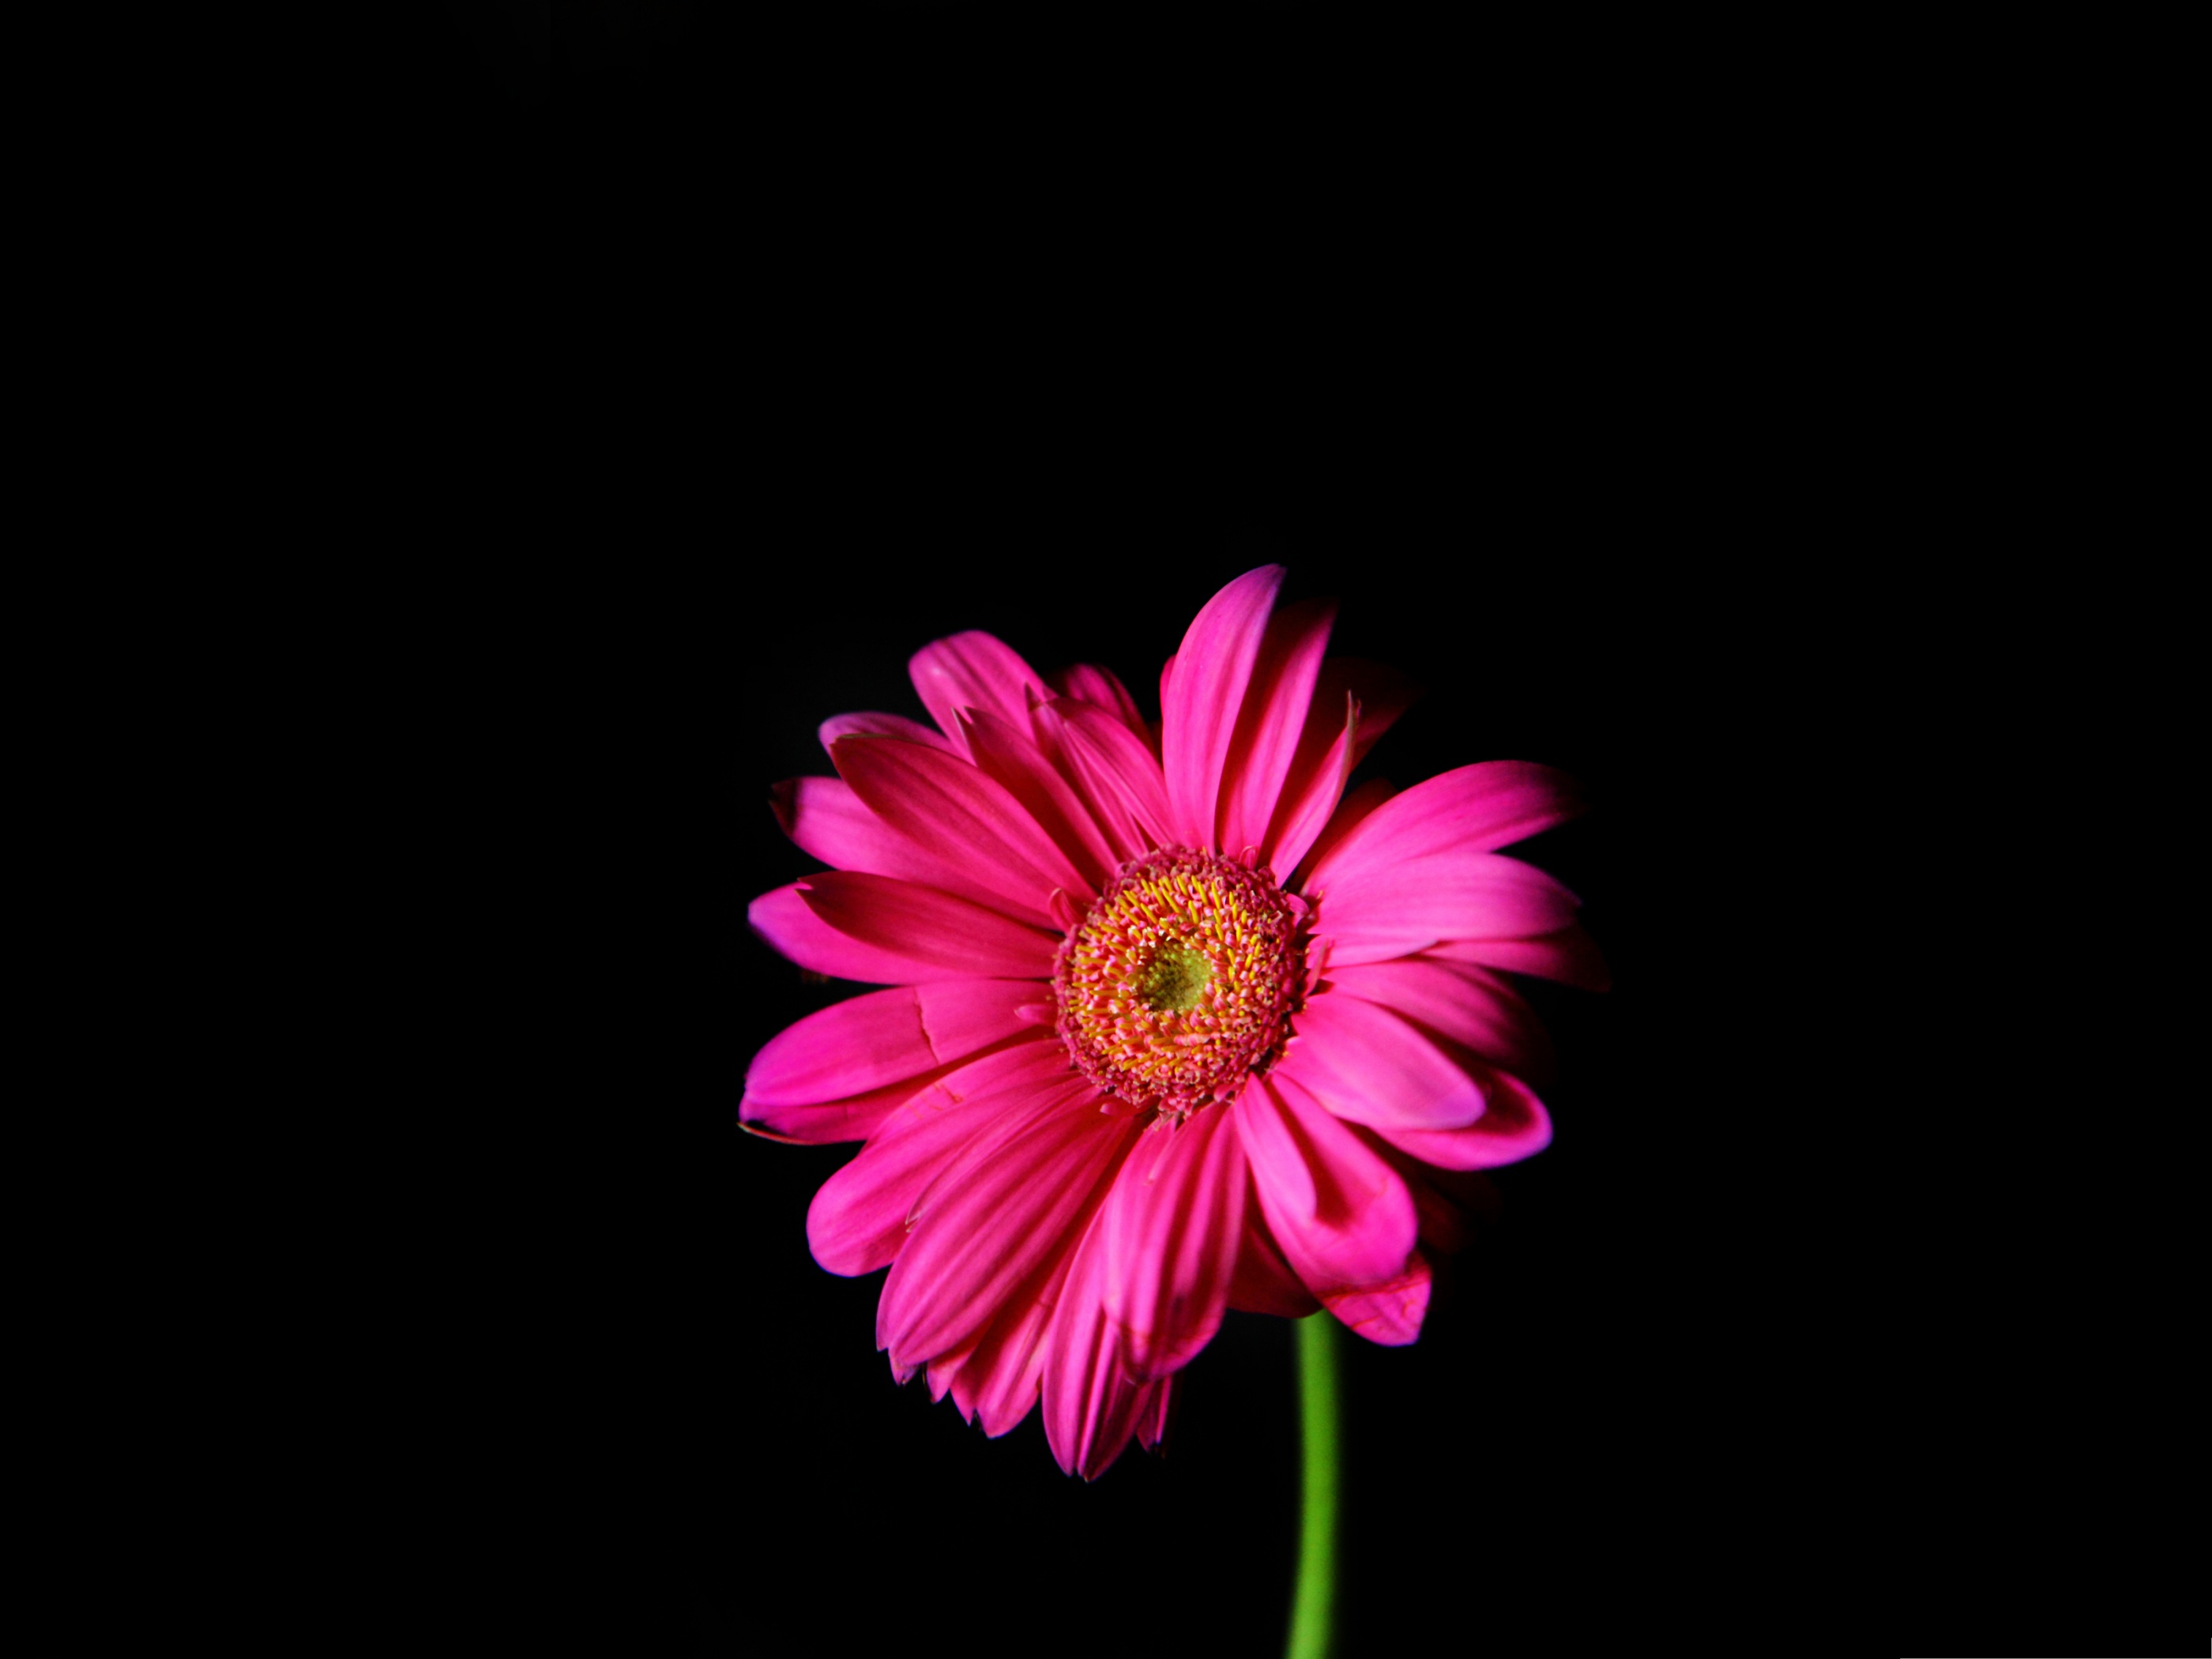 Wallpapers for Computer Hot Pink Gerber Daisy on Dark Background 2800x2100